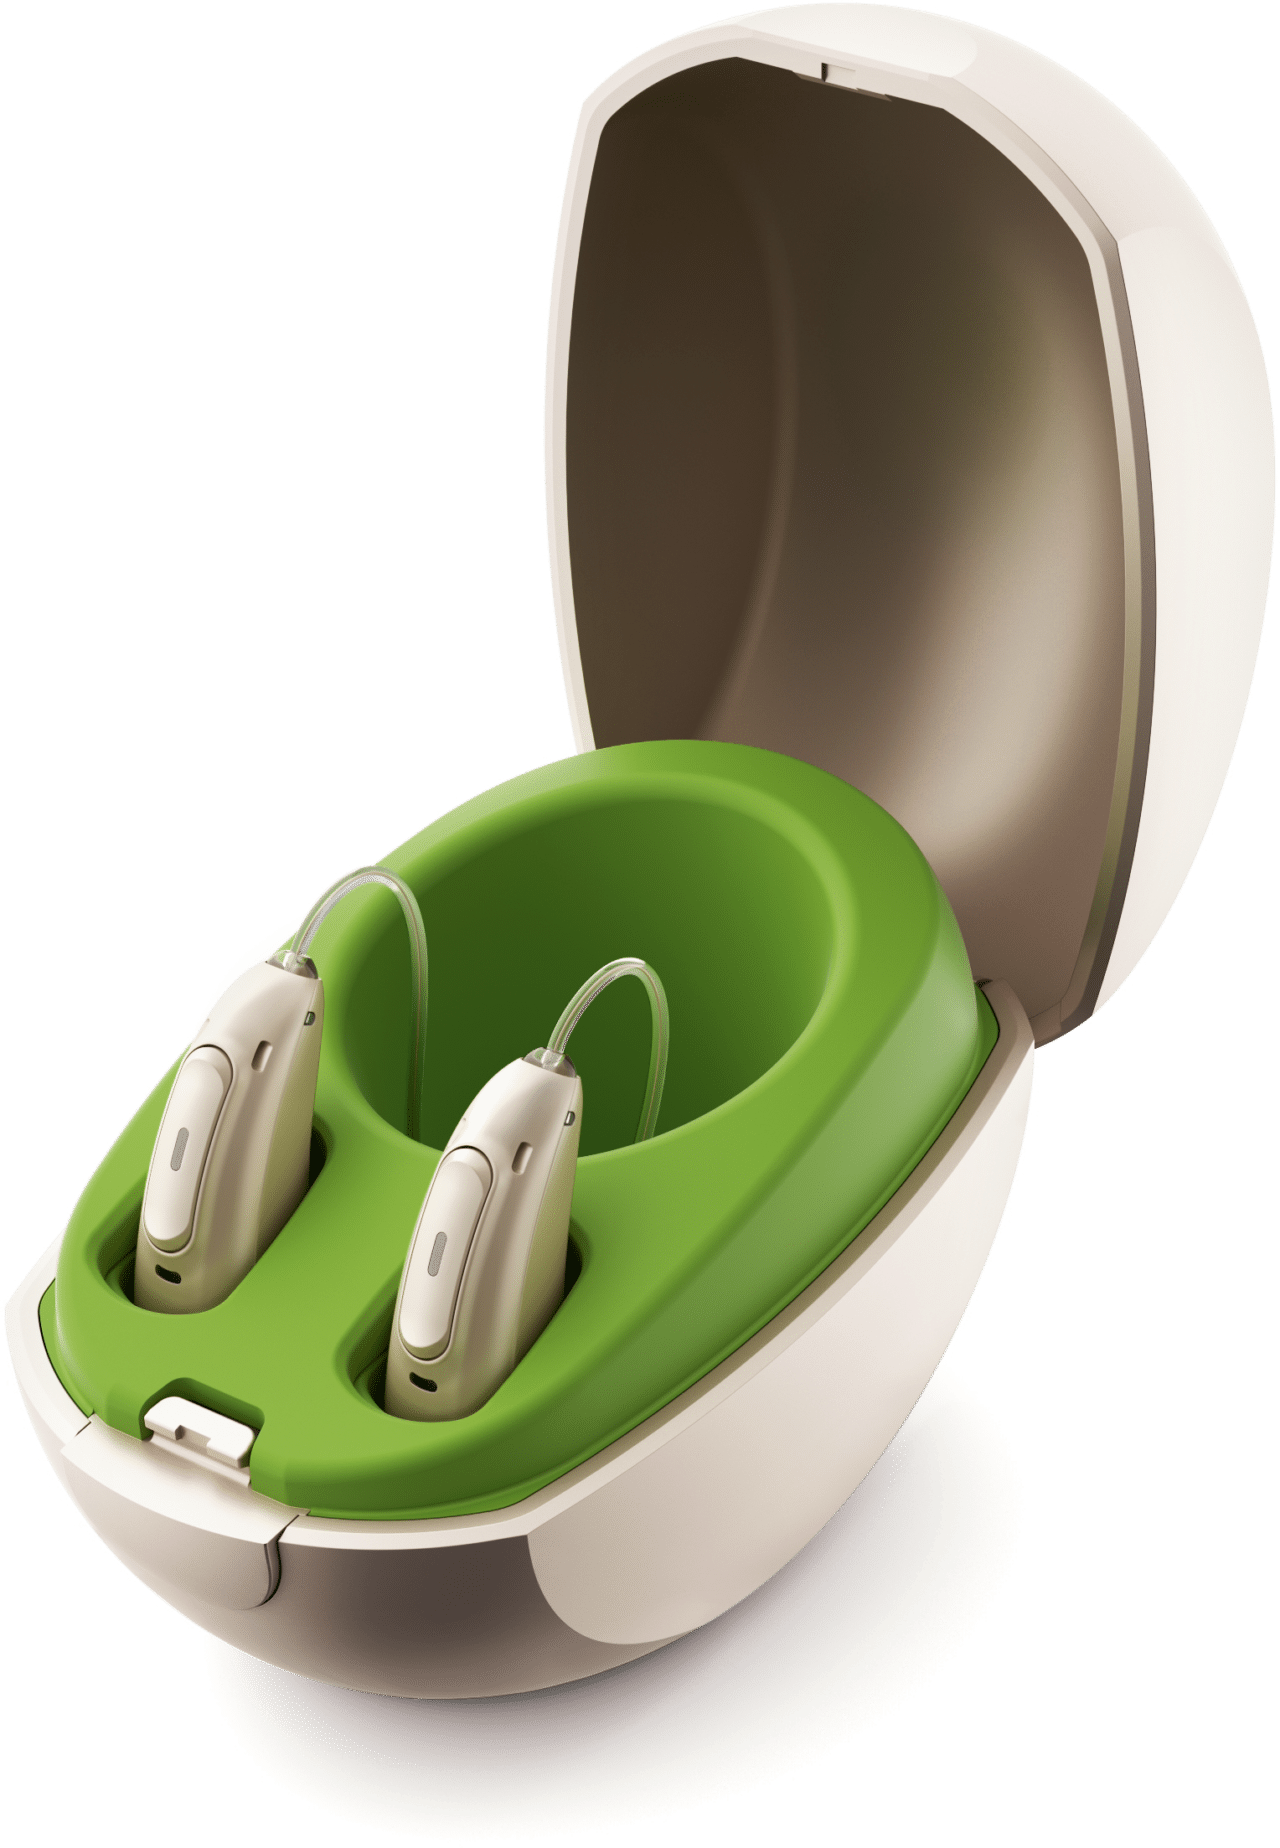 Rechargeable hearing aids in a charging cradle